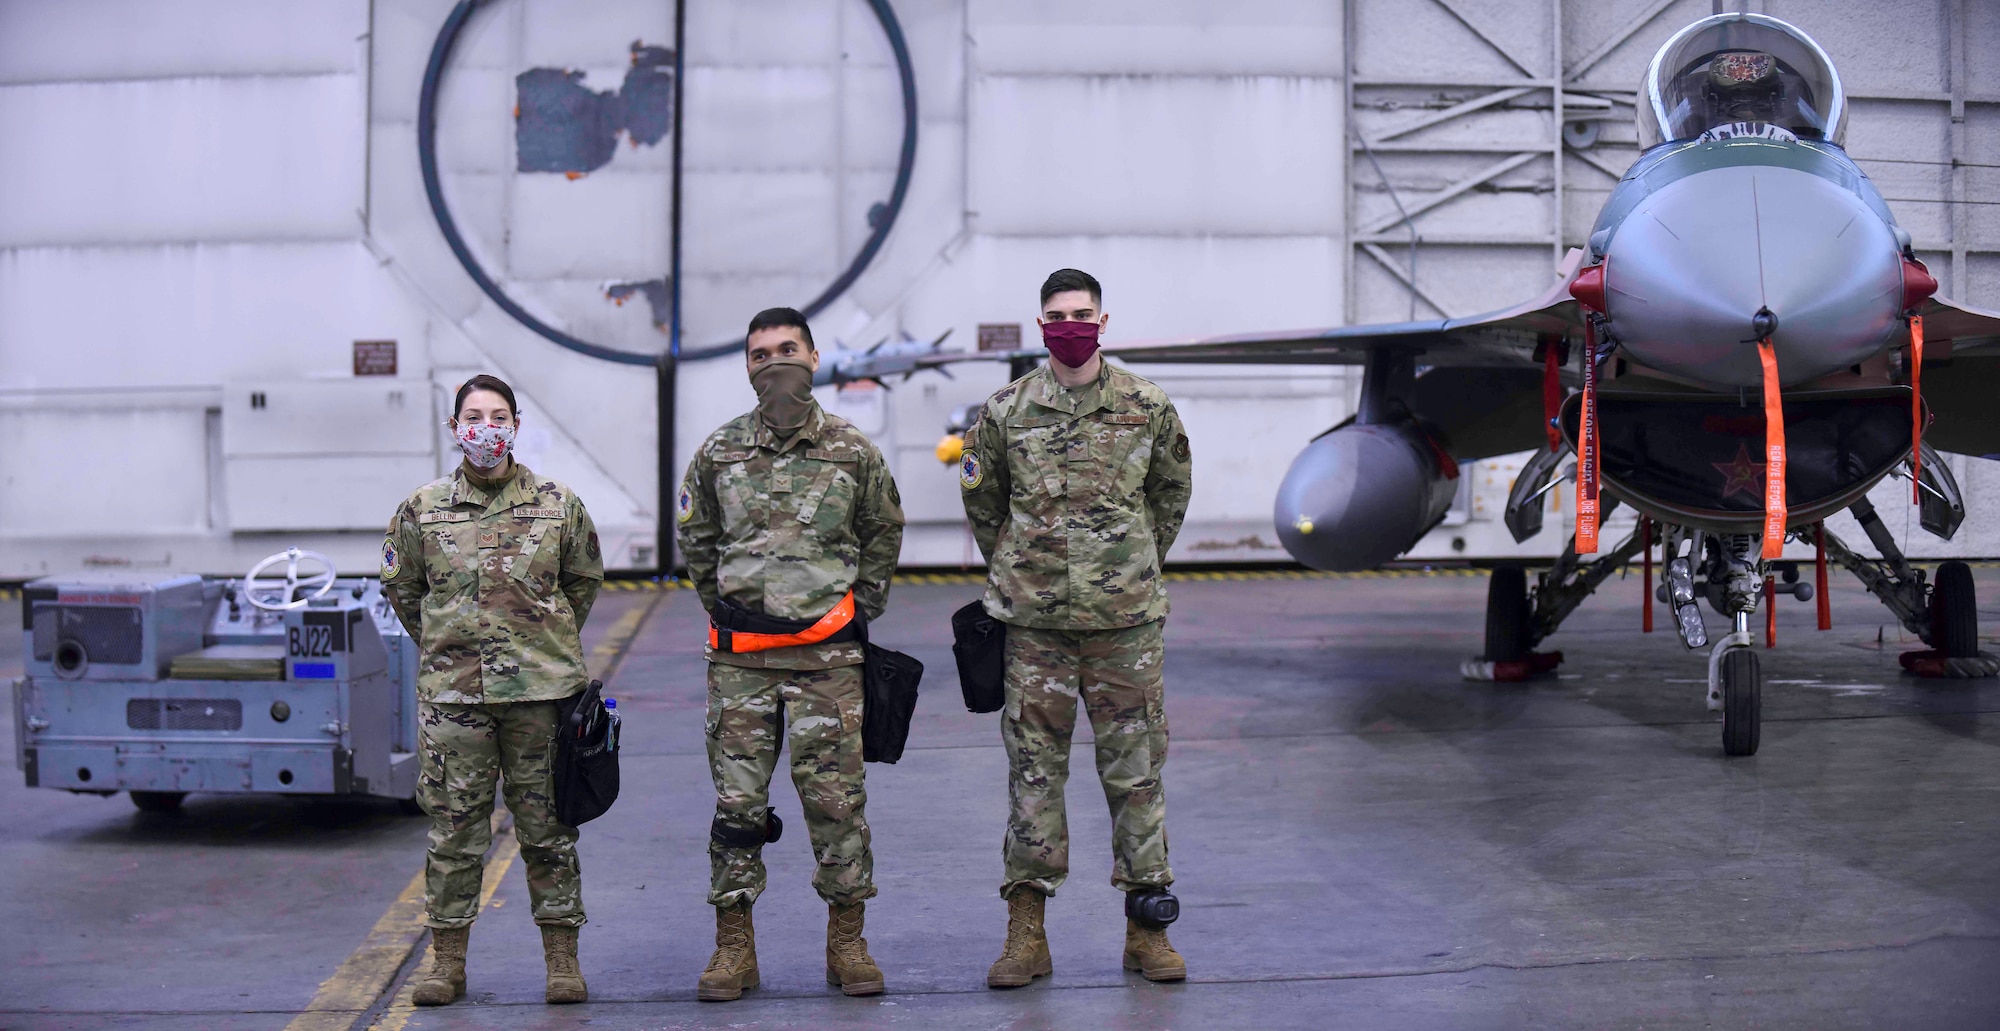 Two load crews prepare to test their abilities in a load crew competition, Jan. 8, 2021, on Eielson AFB, Alaska. The left team represented the new 356th Maintenance Unit and the right team represented the 18th Maintenance Unit and they claimed victory. (U.S. Air Force photo by Senior Airman Keith Holcomb)